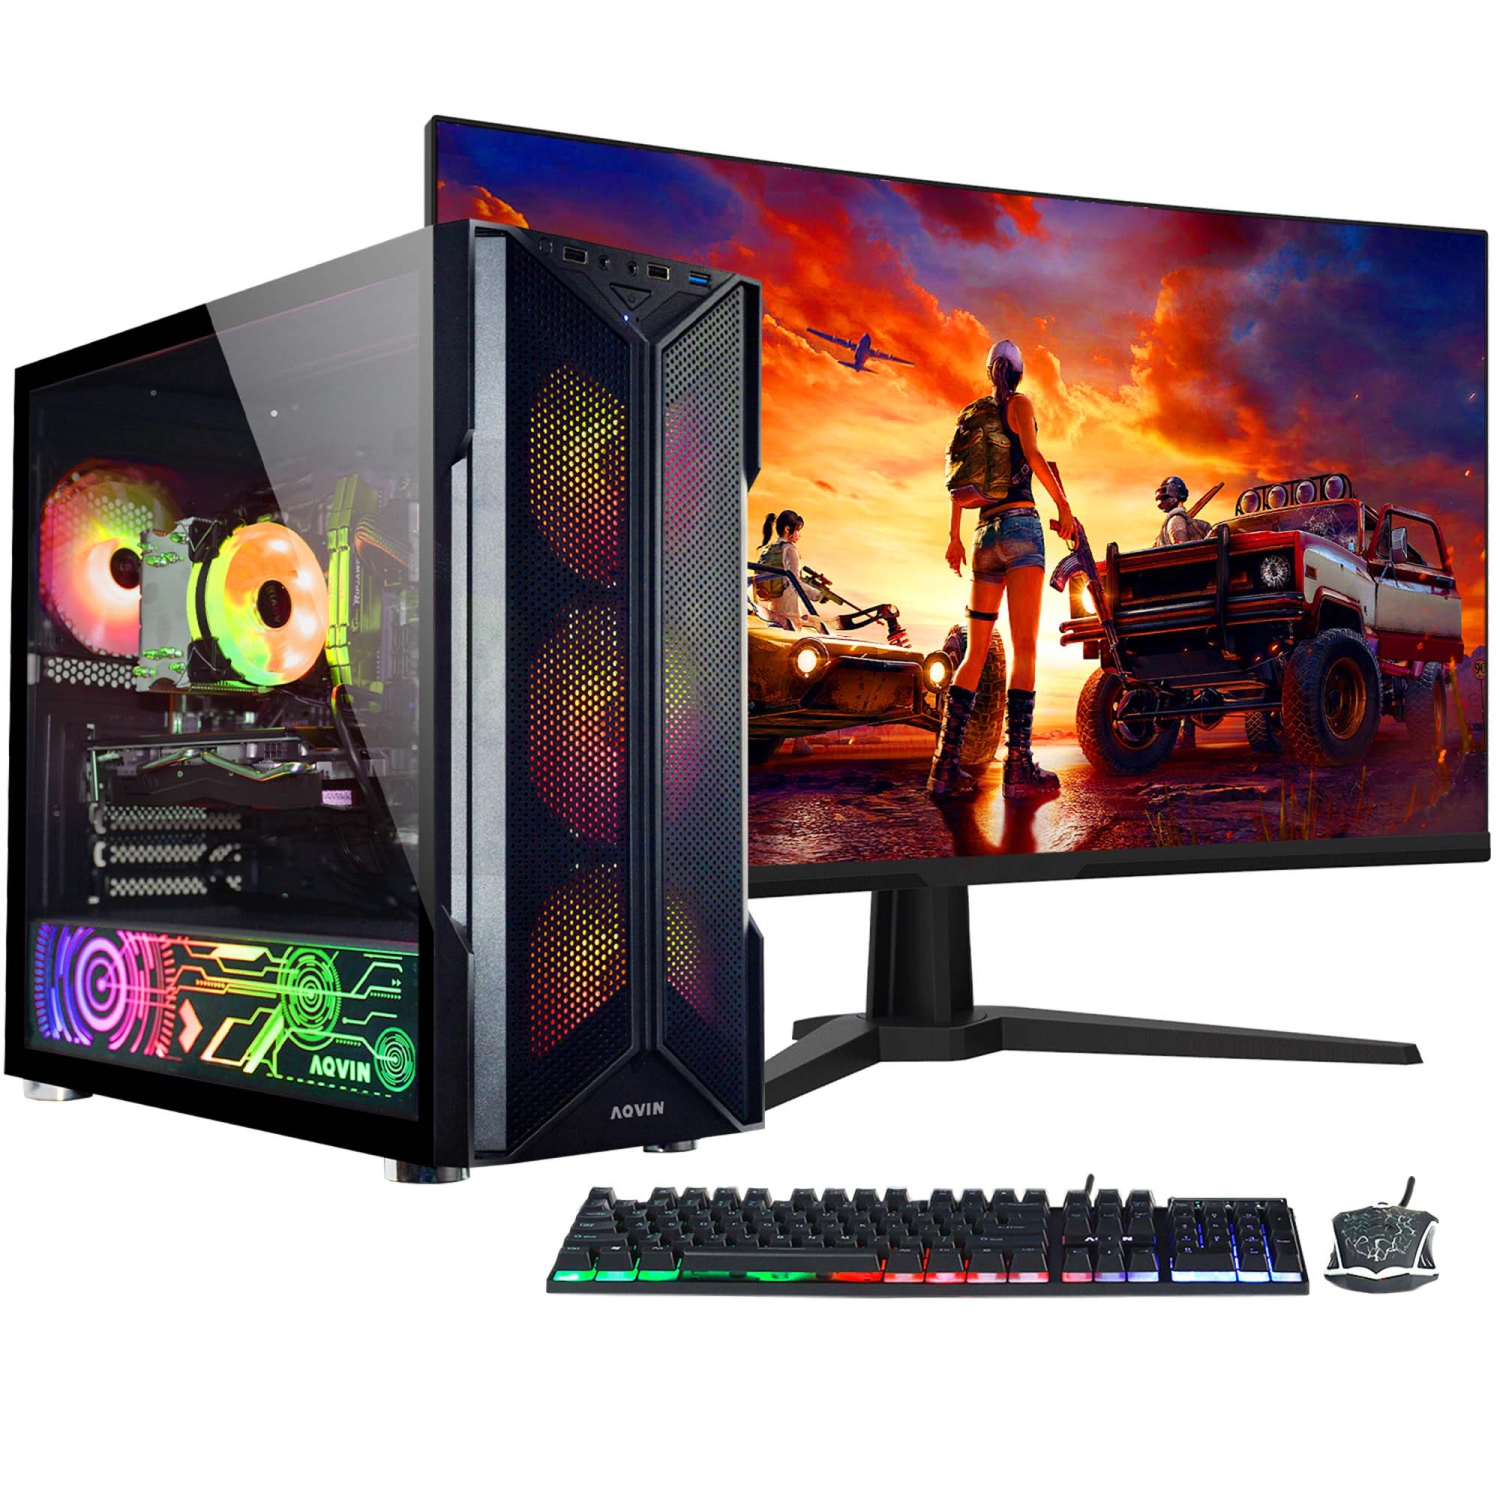 AQVIN-AQ20 Gaming PC Tower Desktop Computer - New 24 inch Curved Gaming Monitor (Intel Core i7 processor/ 32GB RAM/ 1TB SSD/ GeForce RTX 3050 8GB/ Windows 10 Pro)- Only at Best Buy